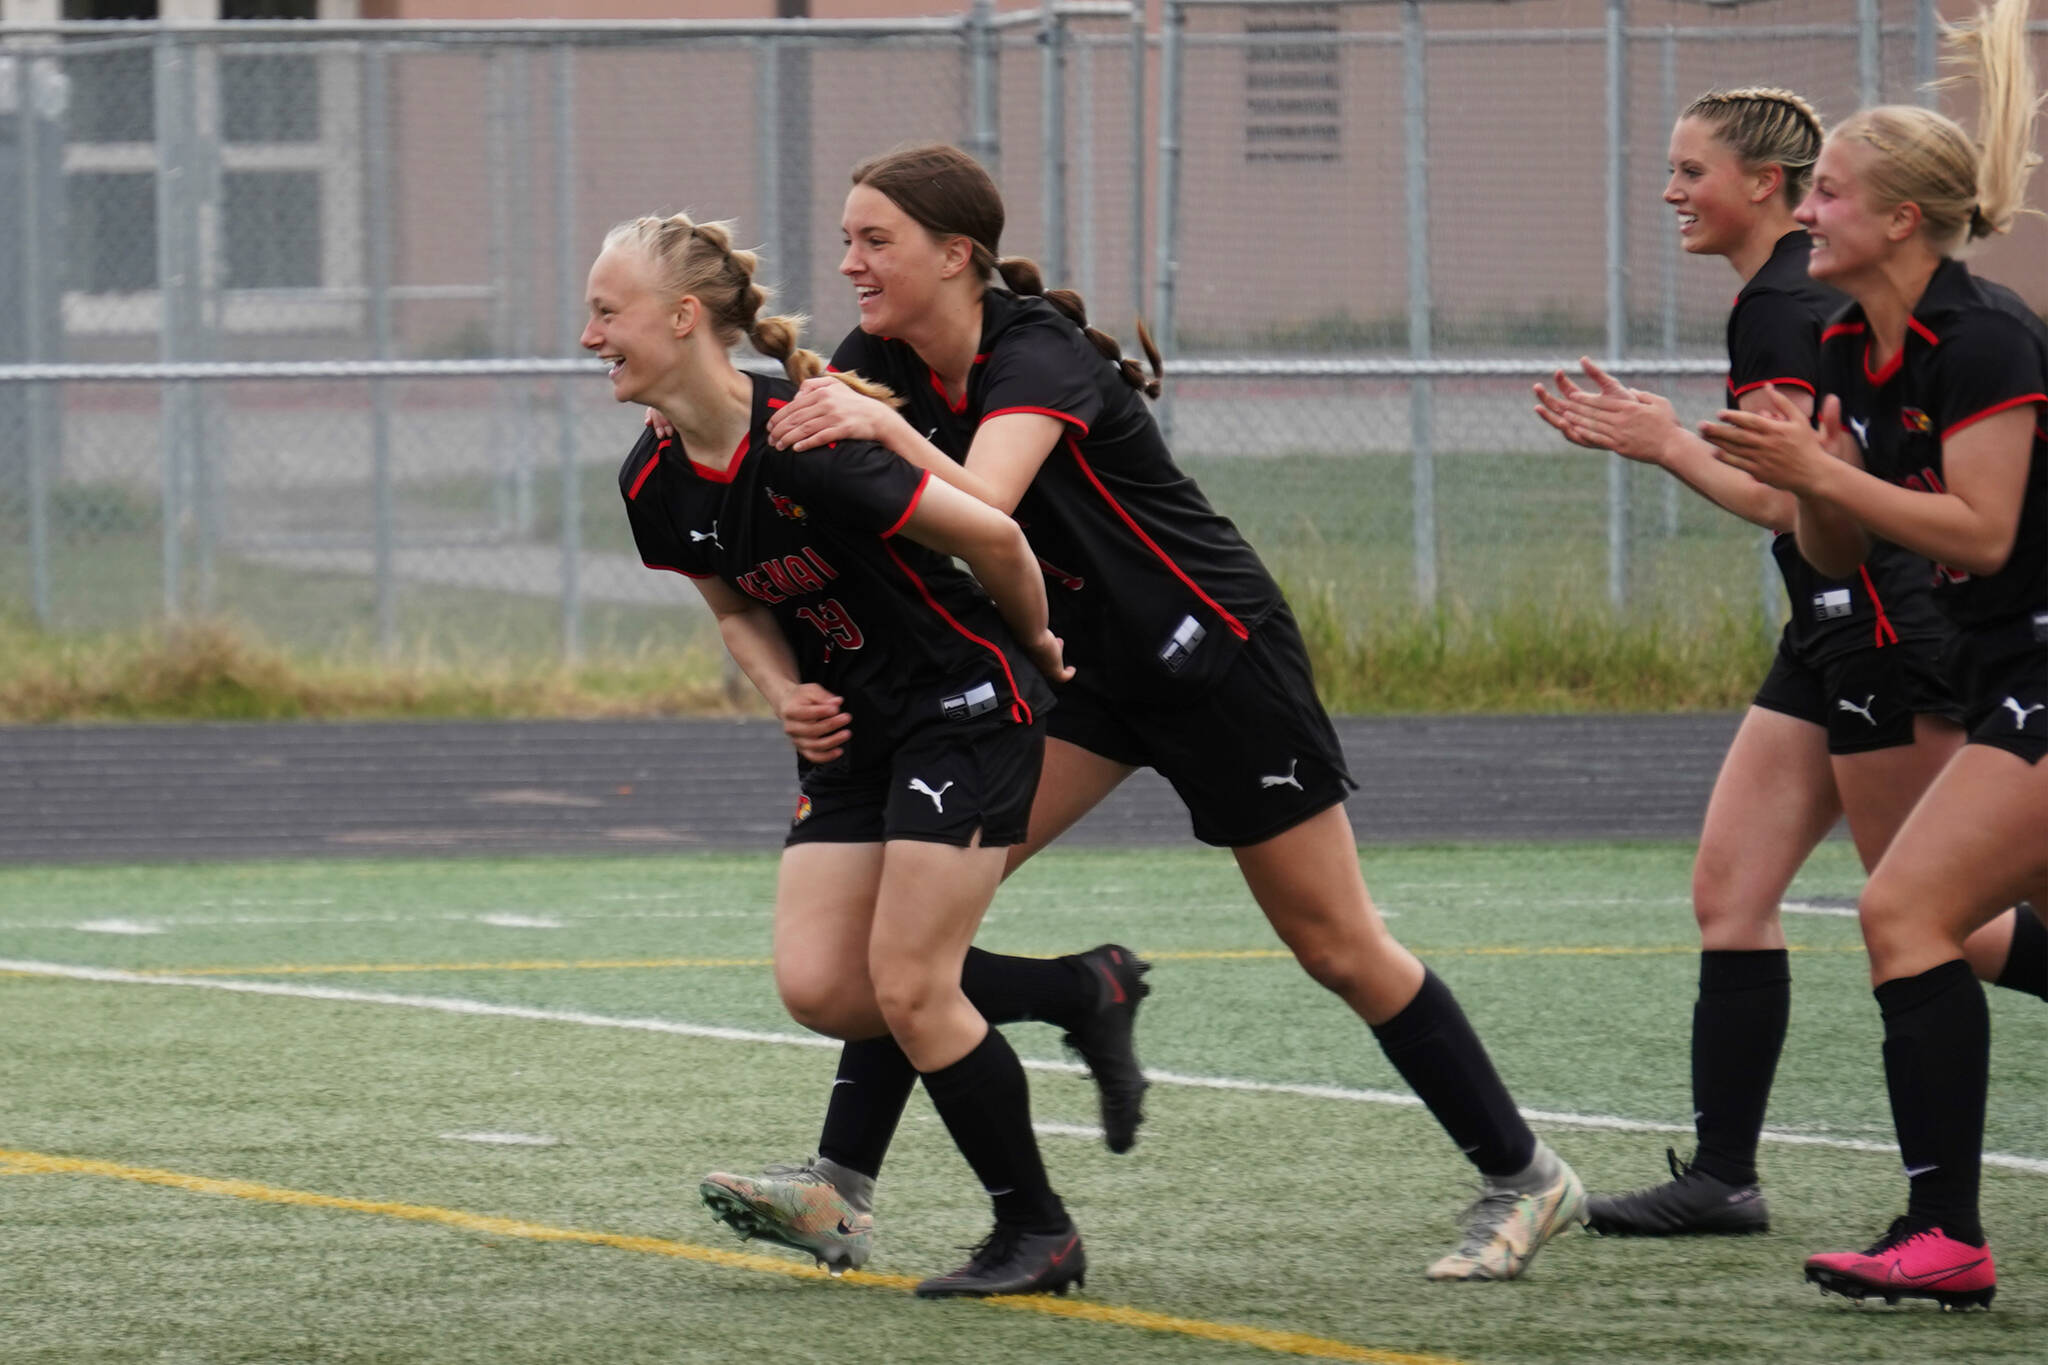 Kenai Central’s Rylie Sparks and Ella Yragui celebrate after Sparks scored their first goal of the game during the Division II Soccer State Championship on Saturday, May 27, 2023, at West Anchorage High School in Anchorage, Alaska. (Jake Dye/Peninsula Clarion)